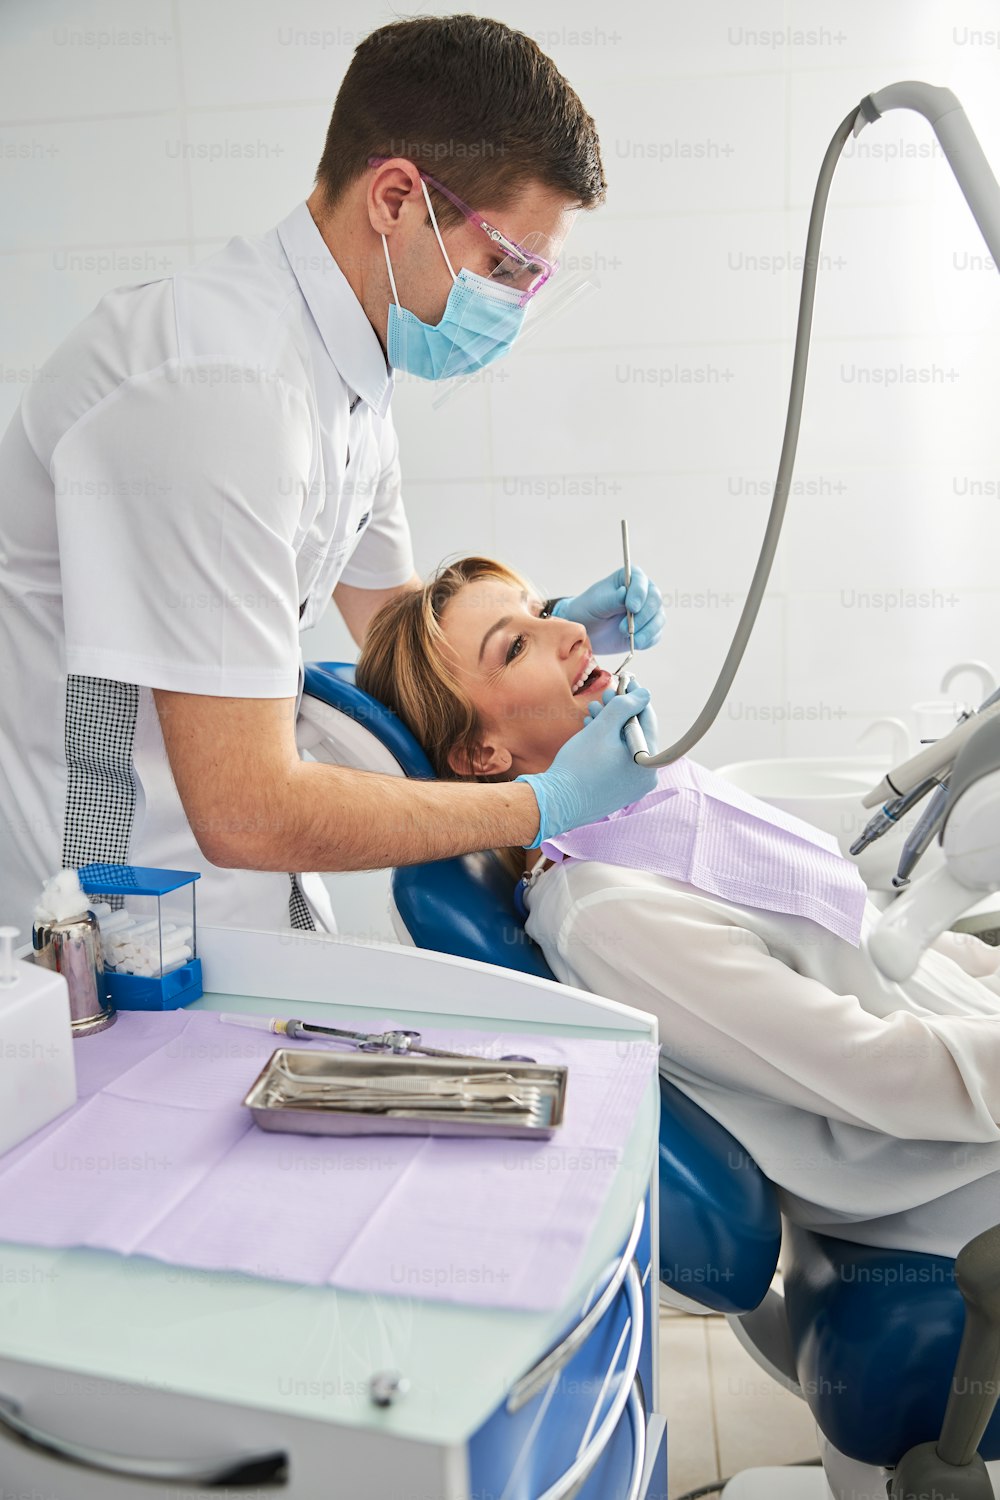 Dentist in a facial mask treating the teeth of a female under operation by using dental tools